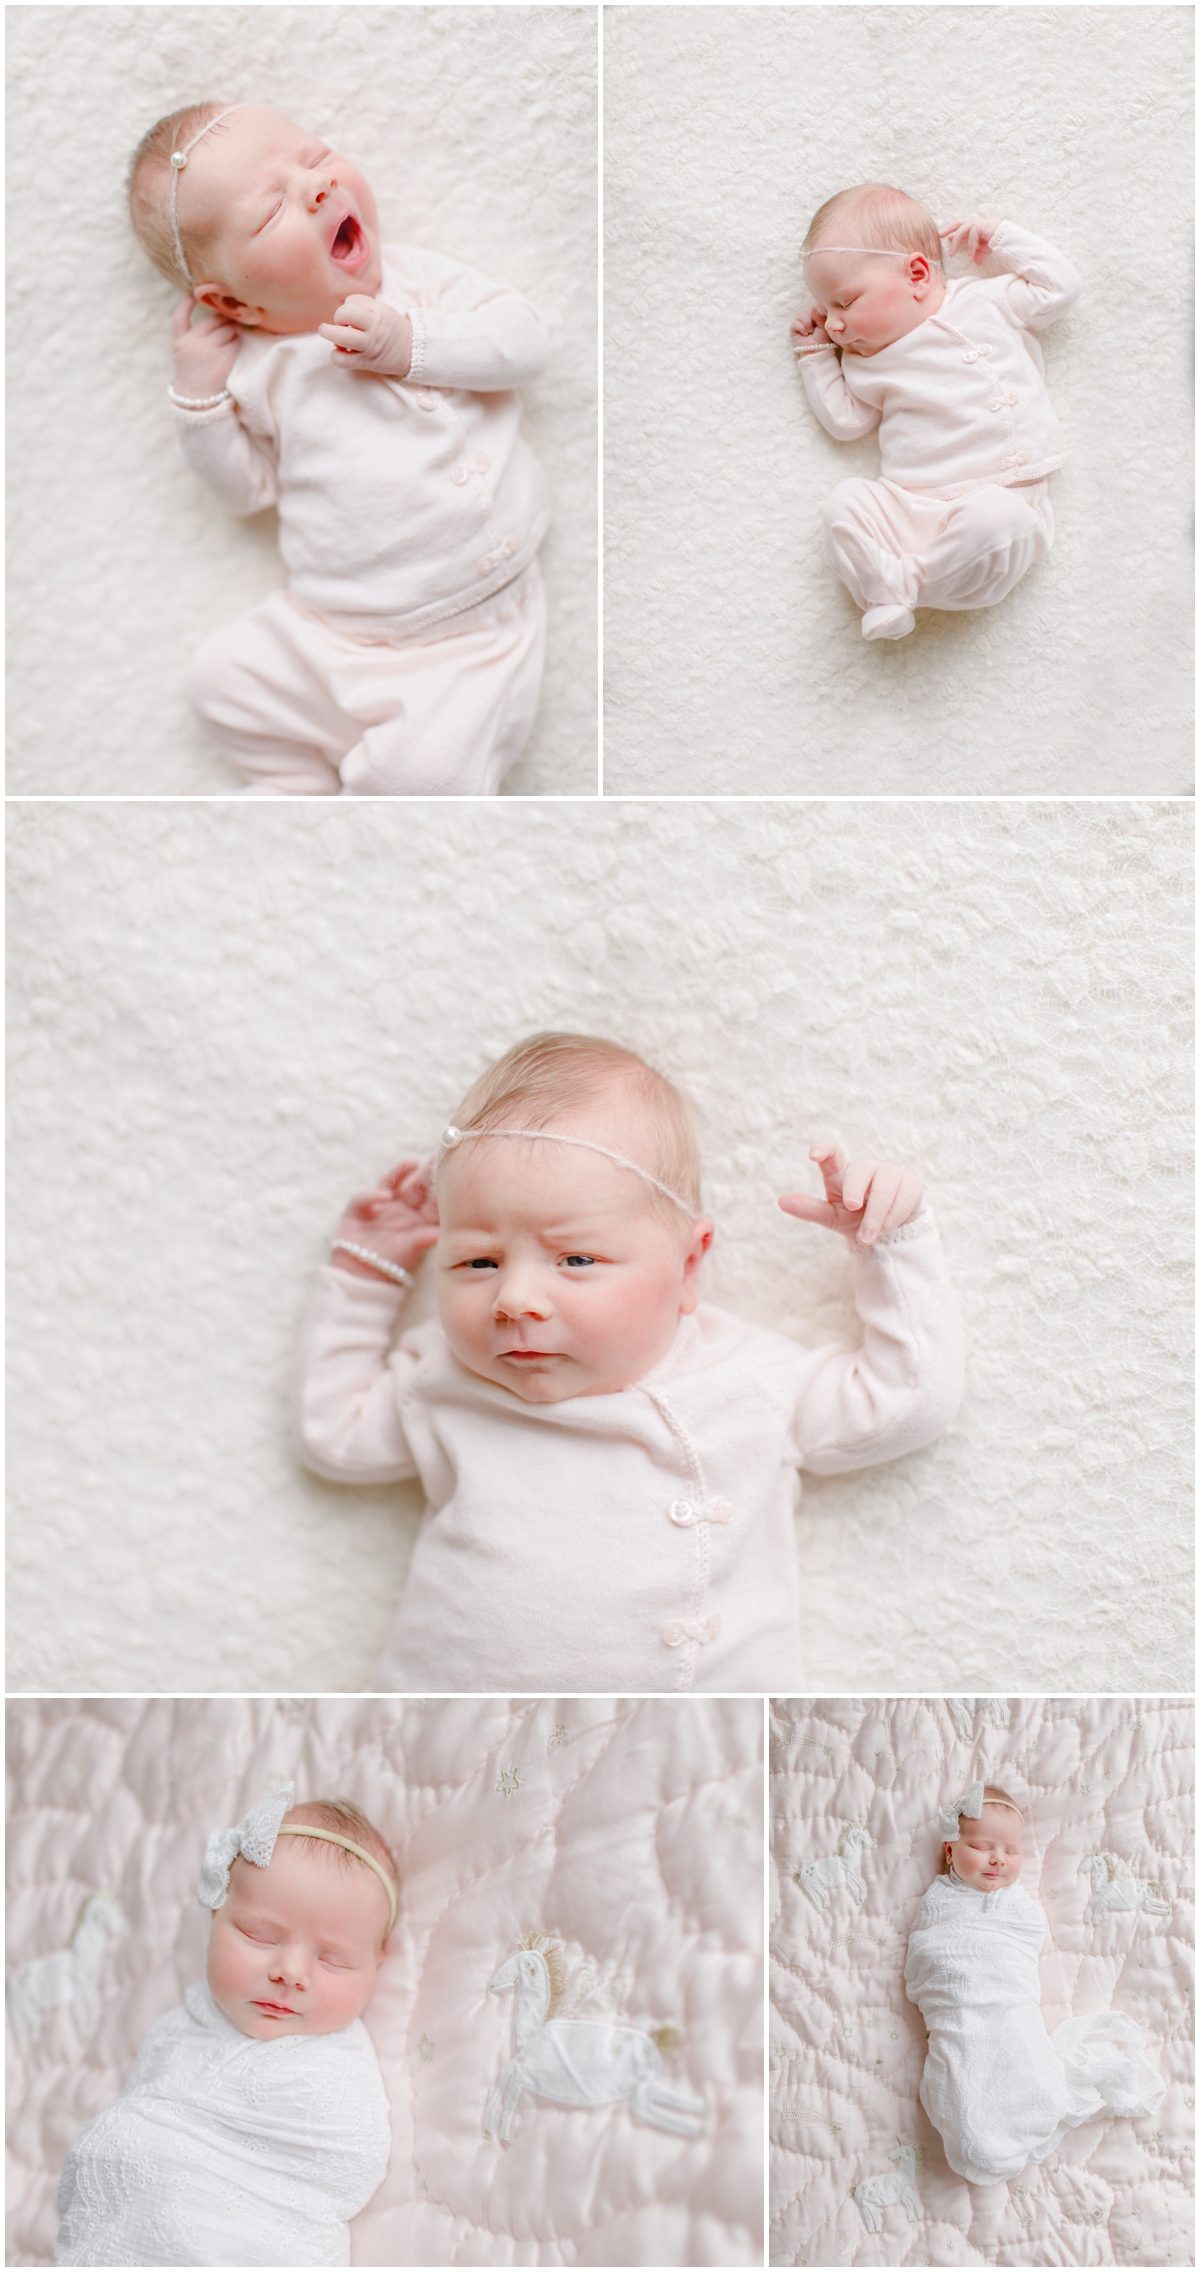 Newborn photographer shares lifestyle portraits infant girl in Knoxville, GA